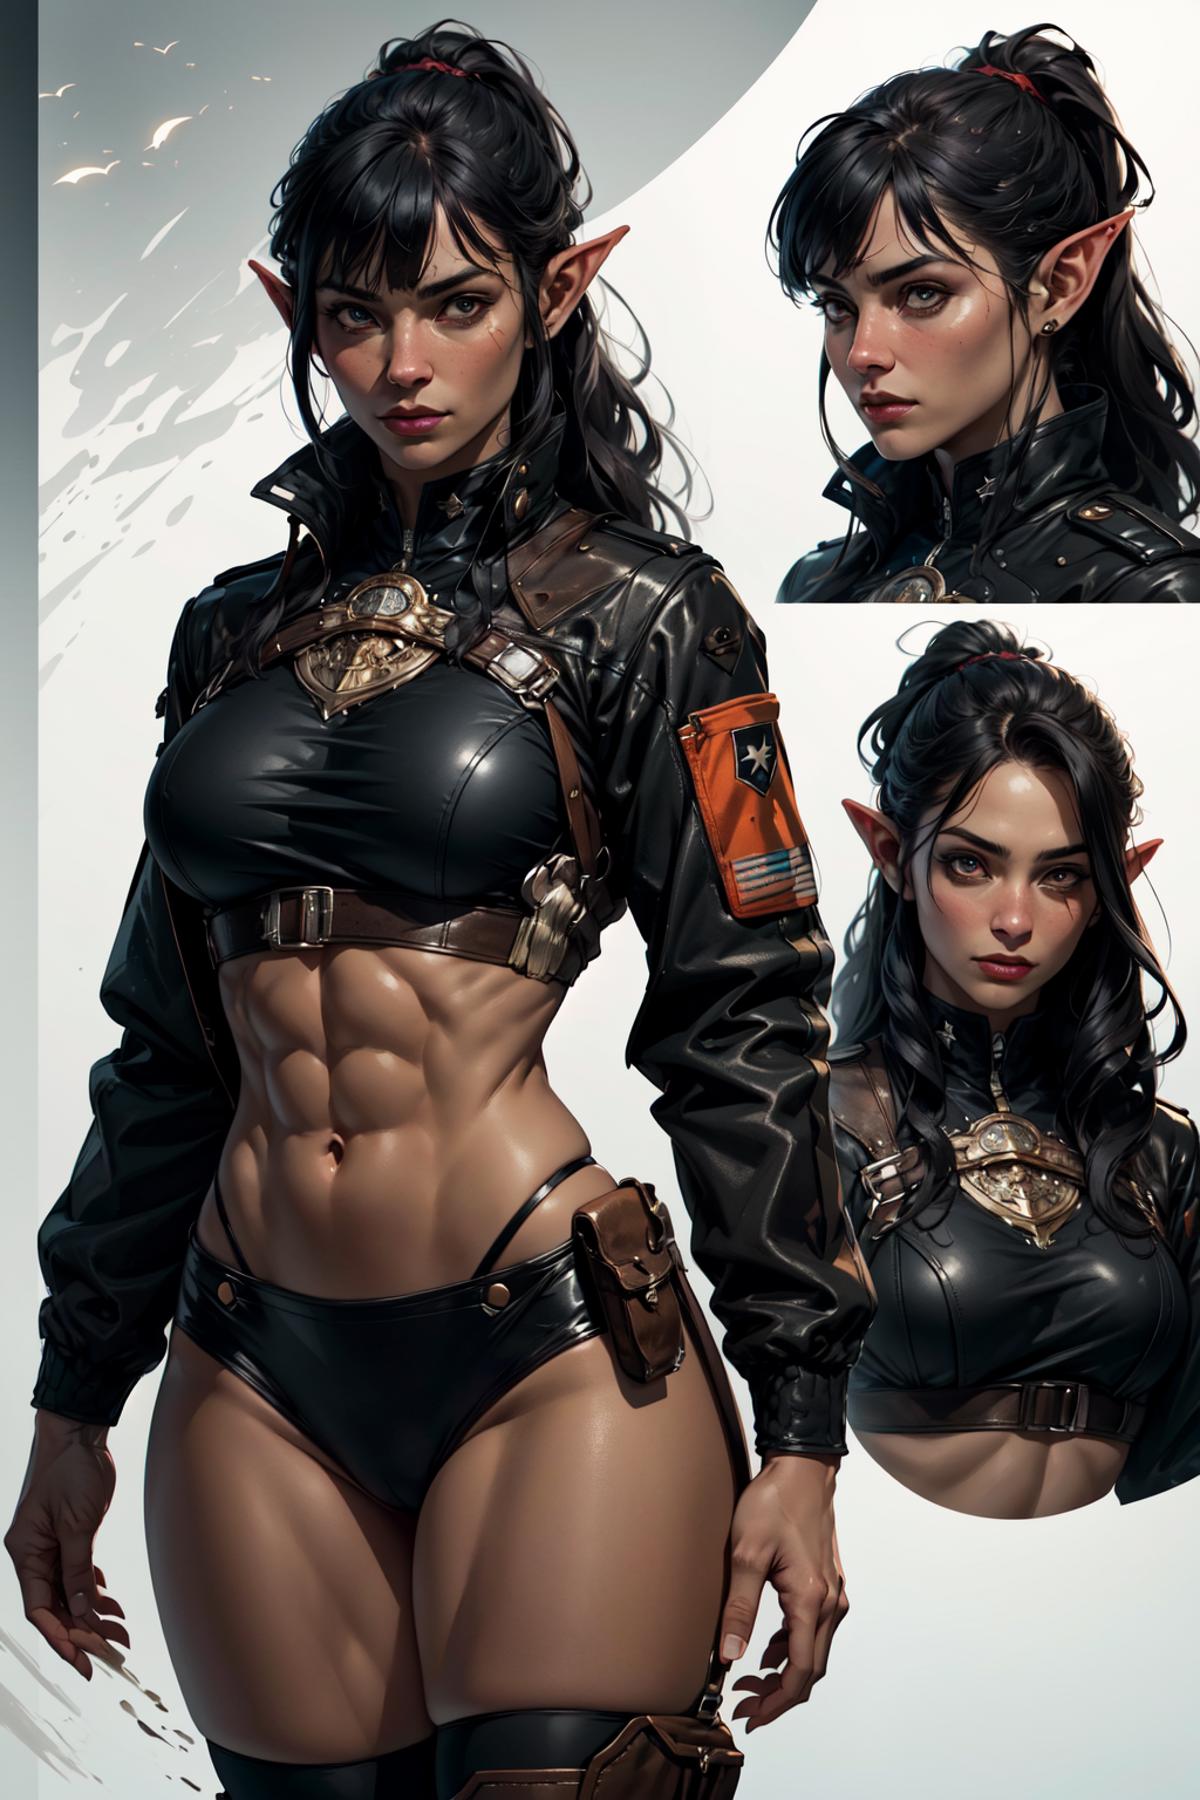 A half-naked female warrior wearing a black leather jacket and holding a gun.